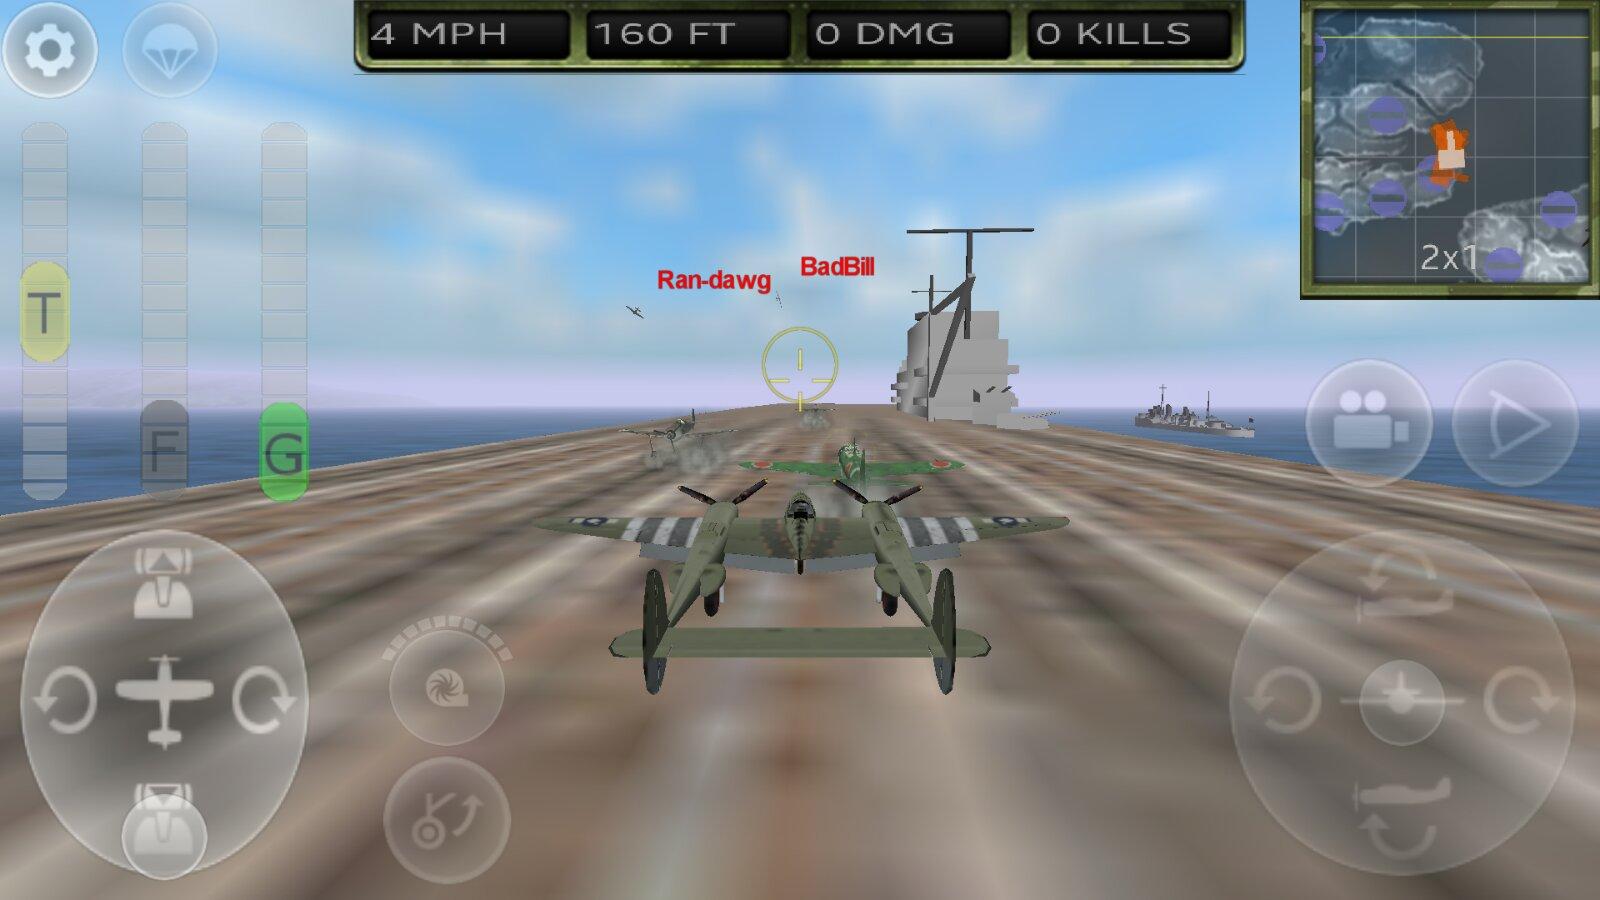 FighterWing 2 Flight Simulator - Android Apps on Google Play